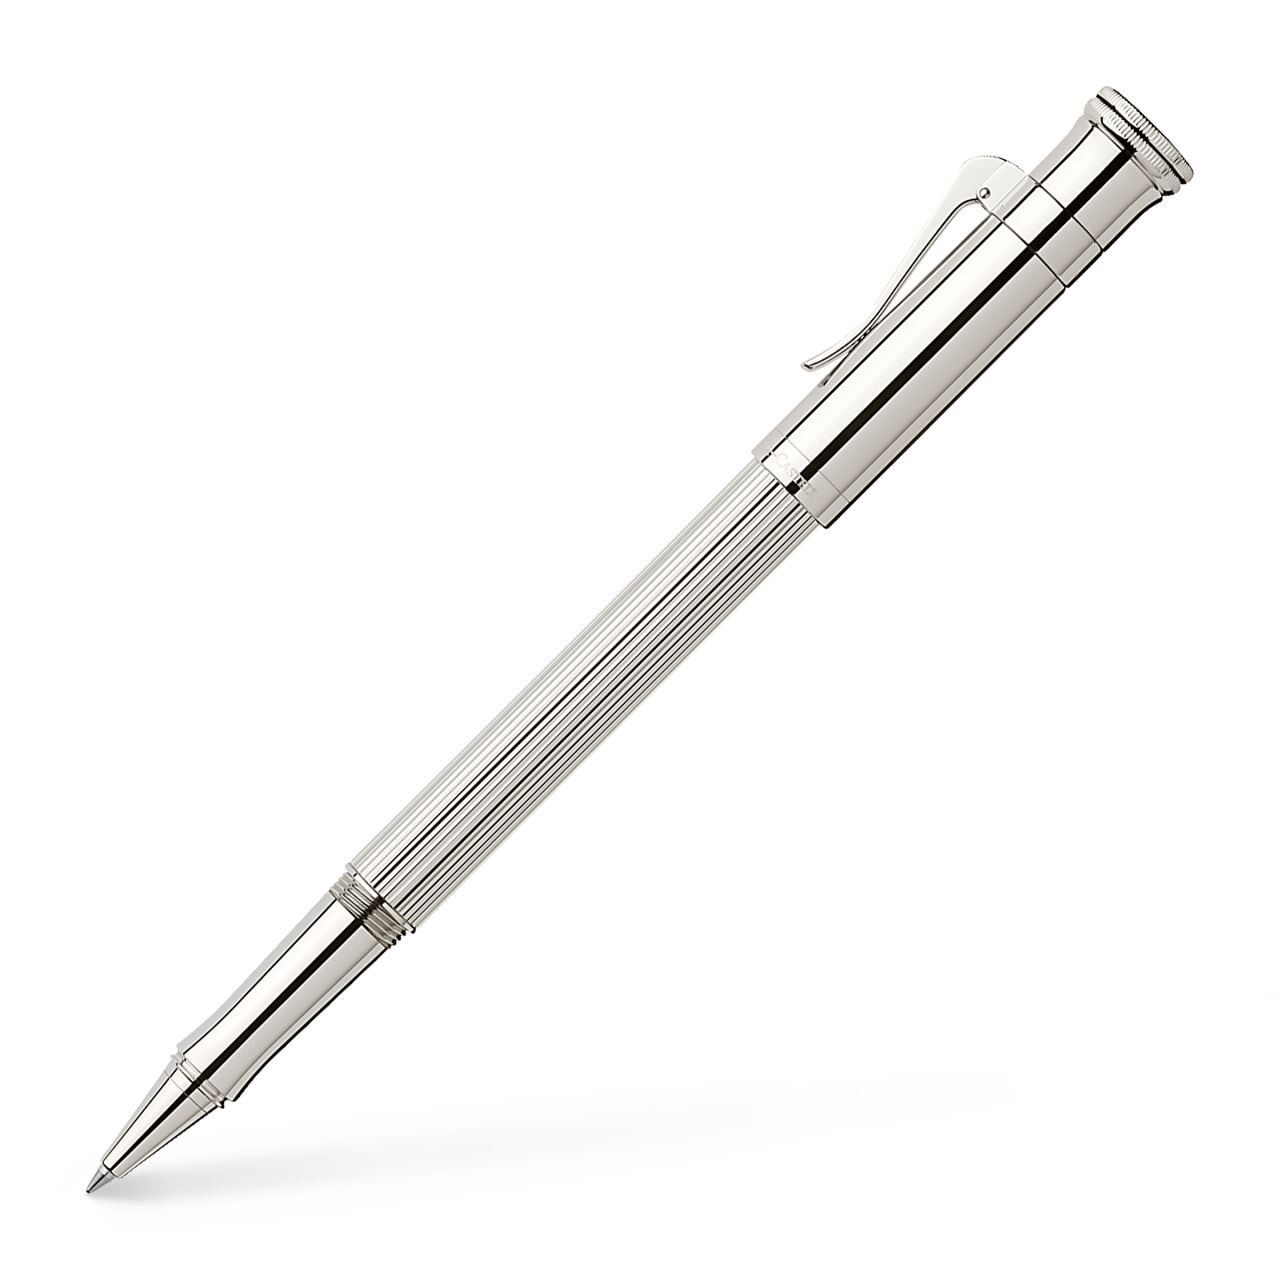 Graf-von-Faber-Castell - Rollerball pen Classic sterling silver